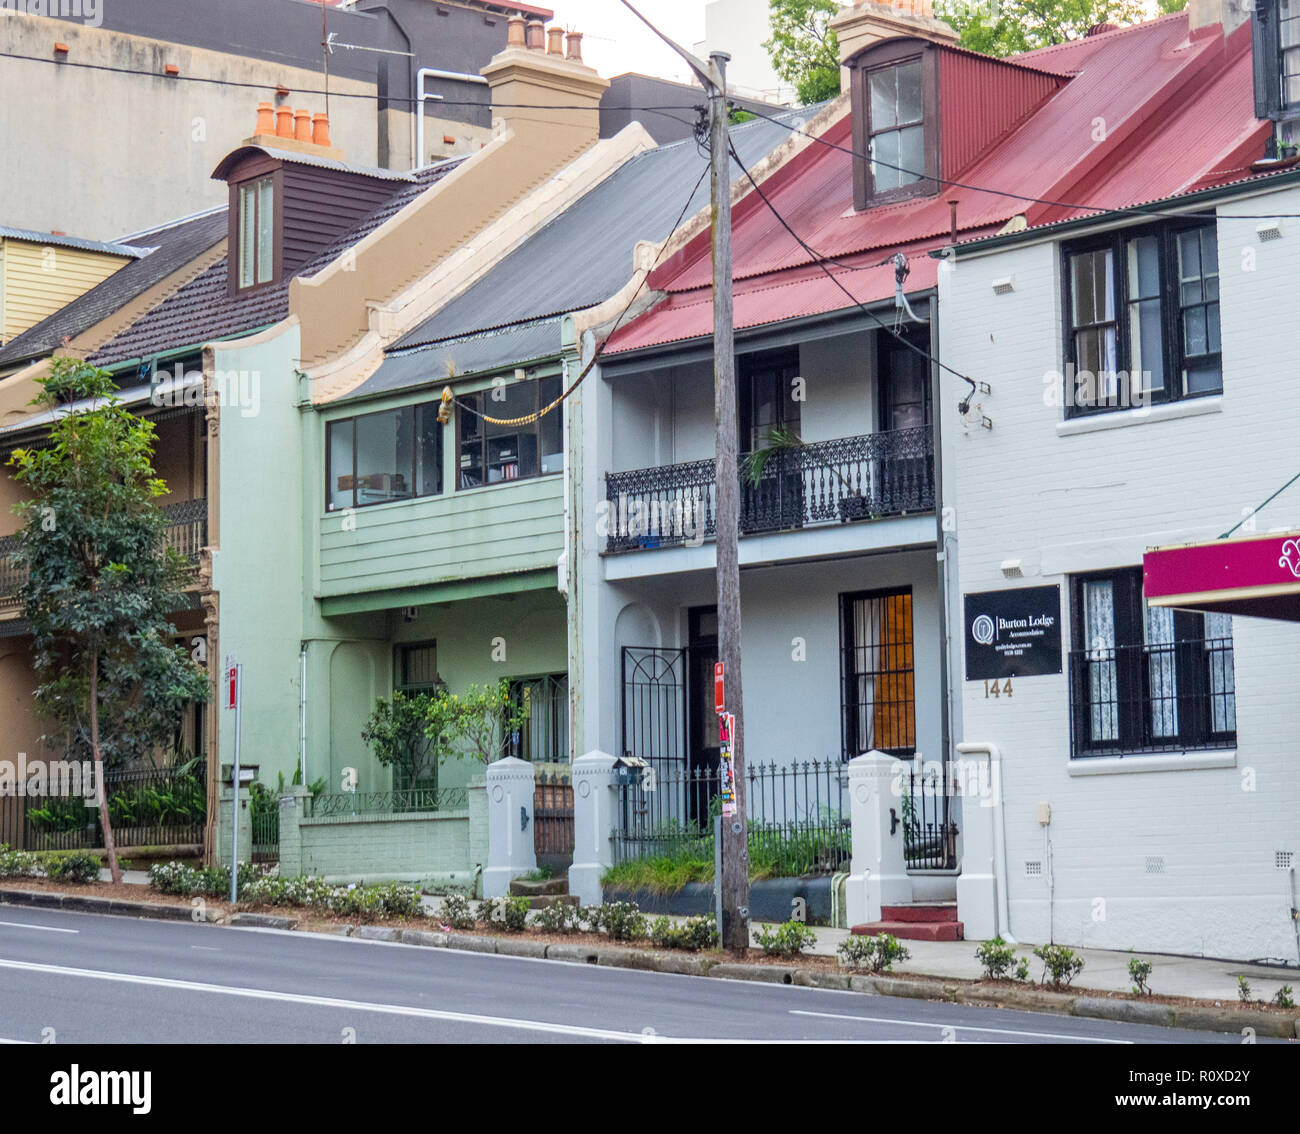 Row of terraced houses example of colonial architecture Darlinghurst Sydney NSW Australia. Stock Photo